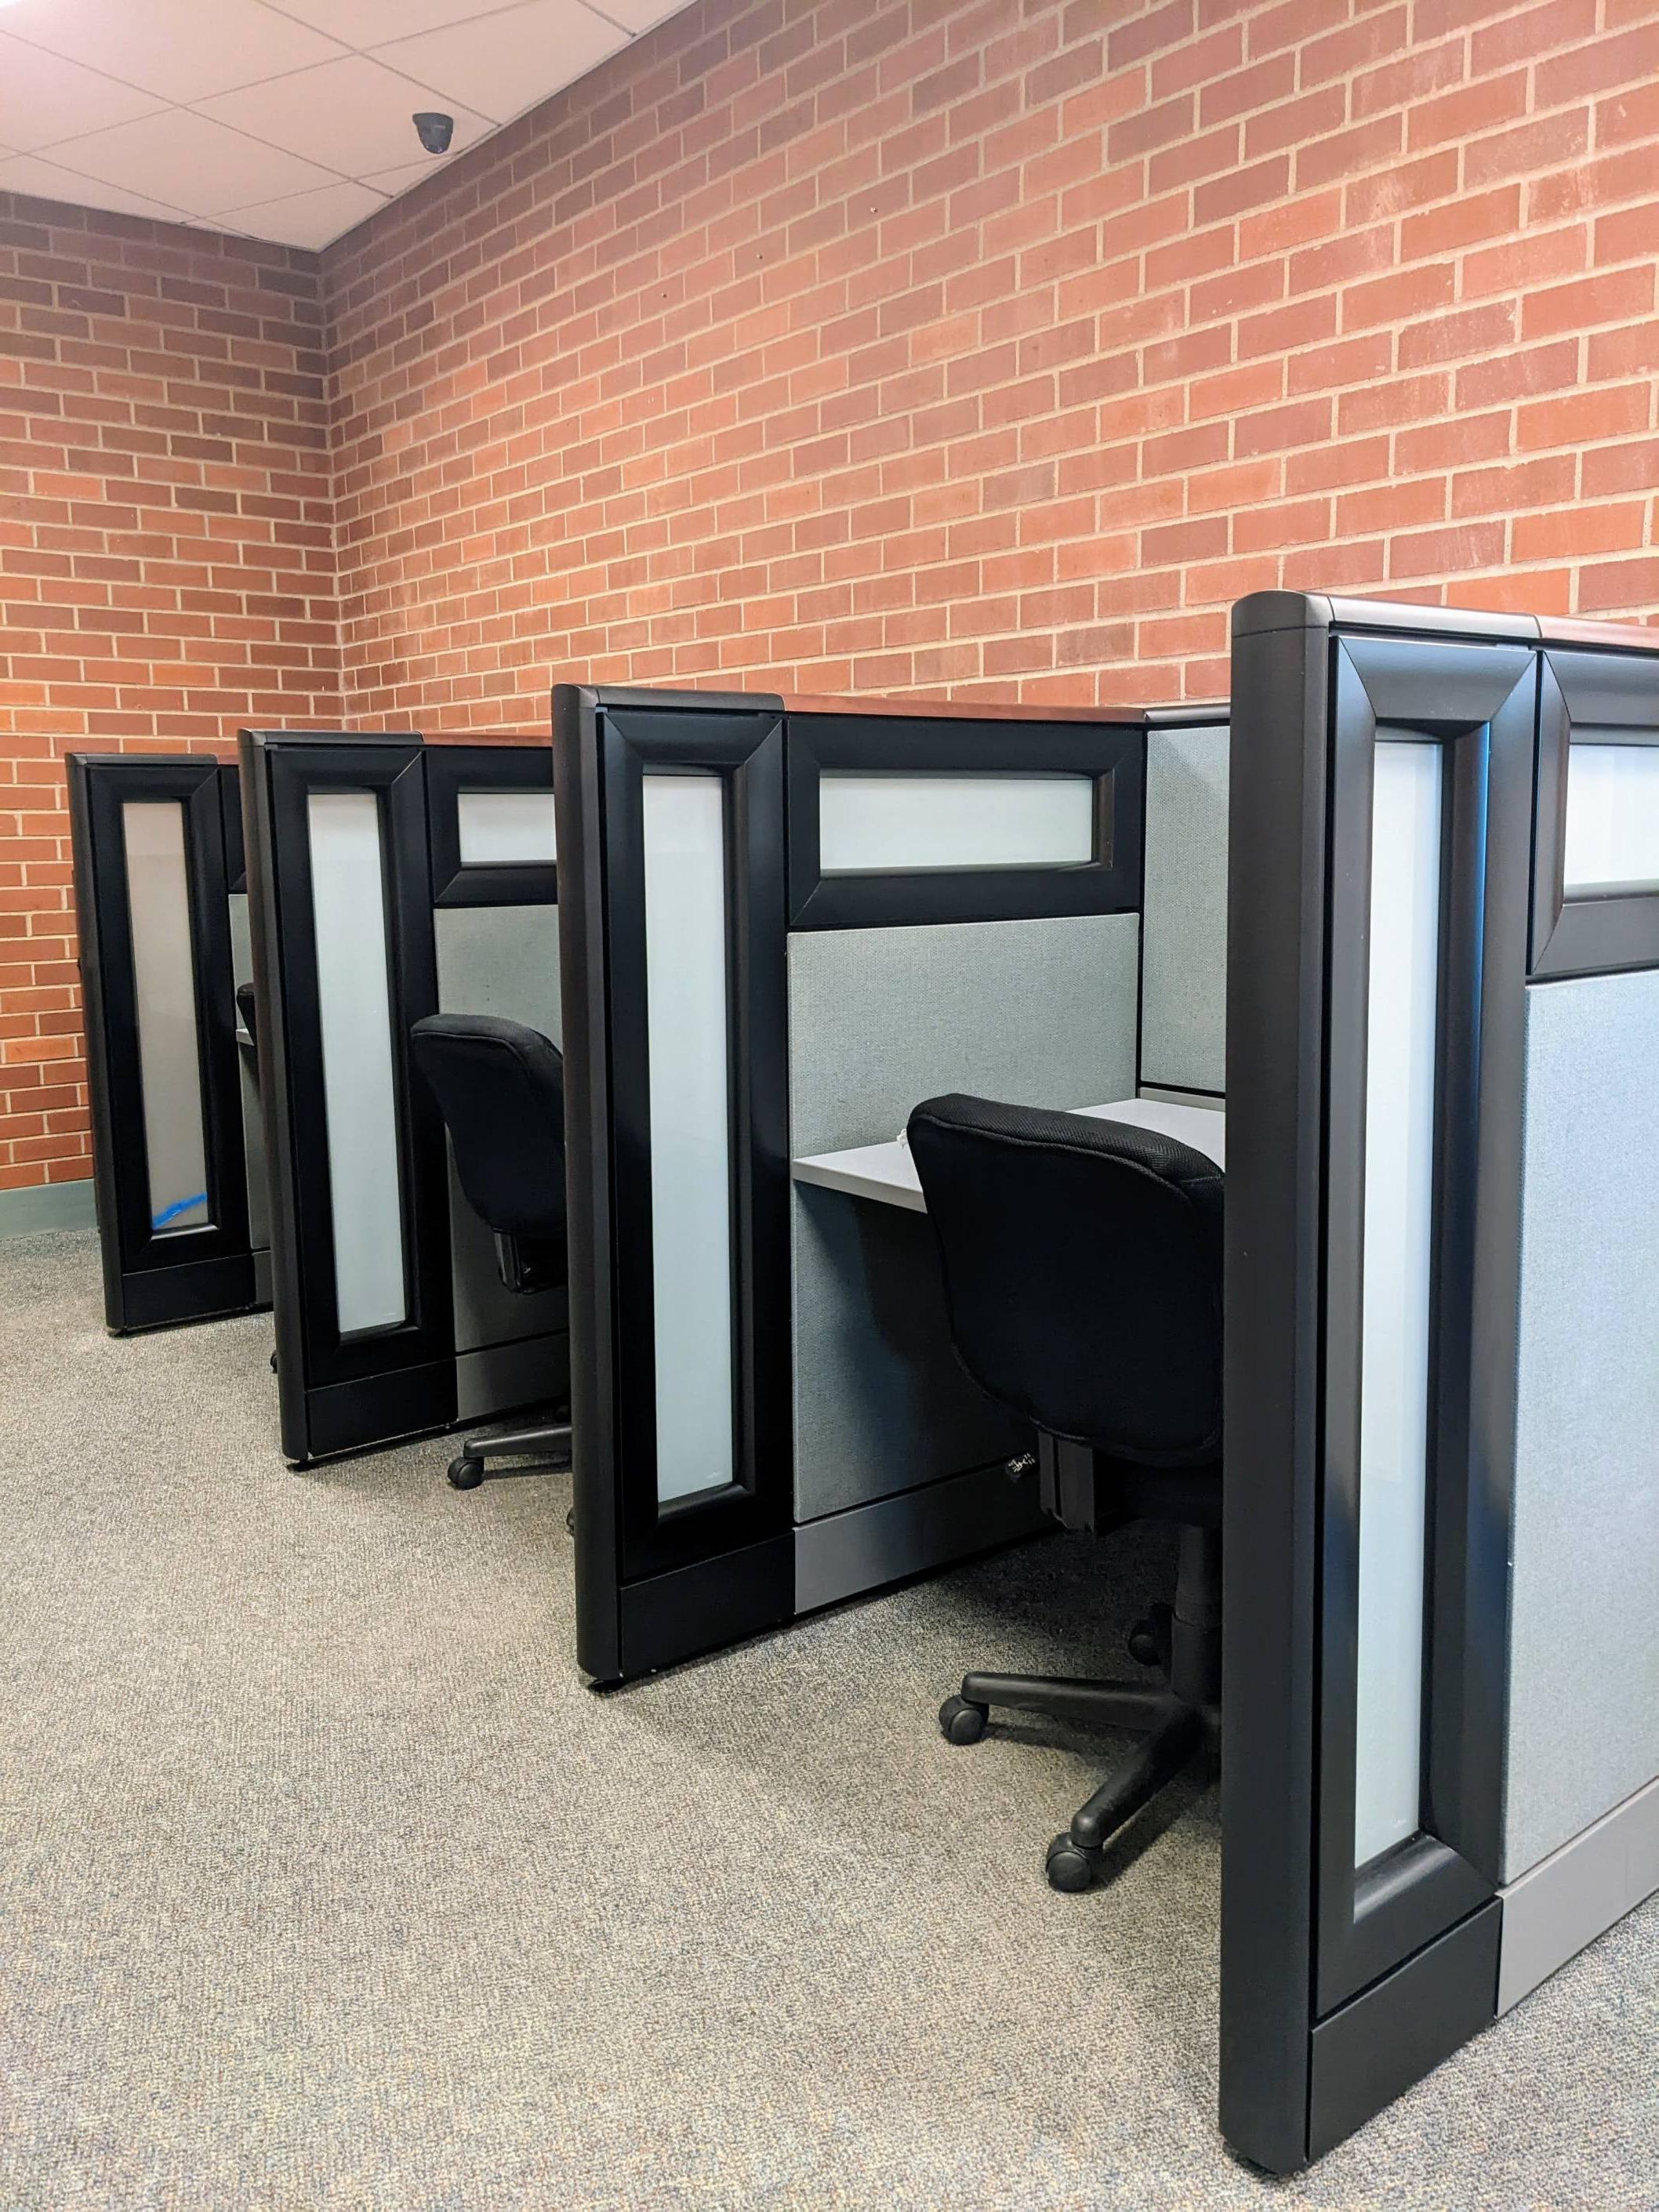 Distraction Reduced testing area -three cubicles with rolling chairs